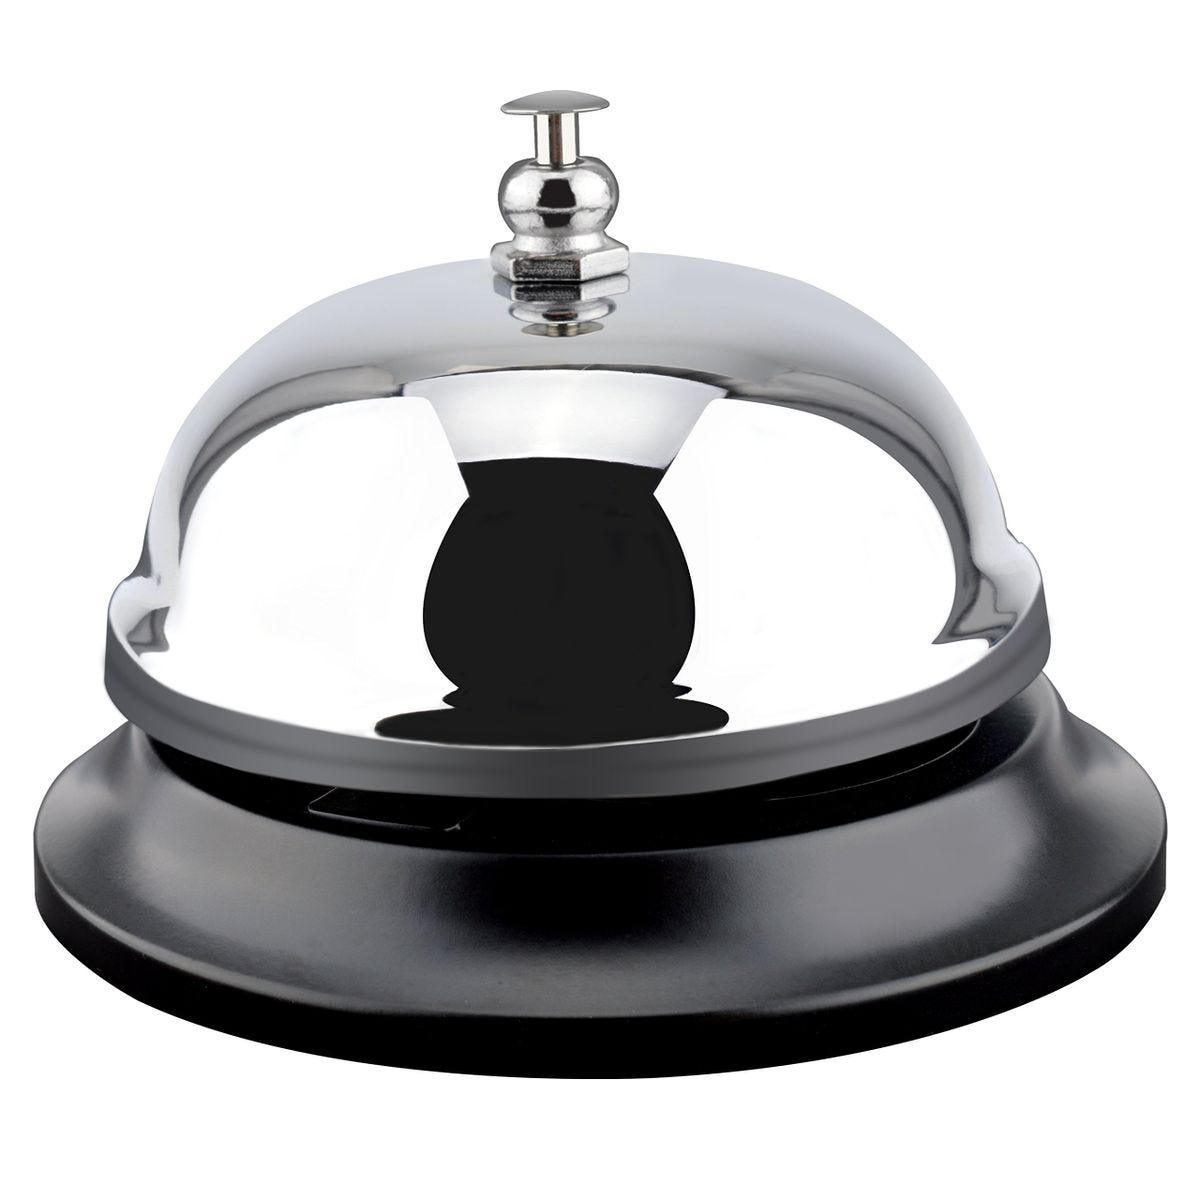 Best Rated in Office Desk Call Bells & Helpful Customer Reviews - Amazon.com